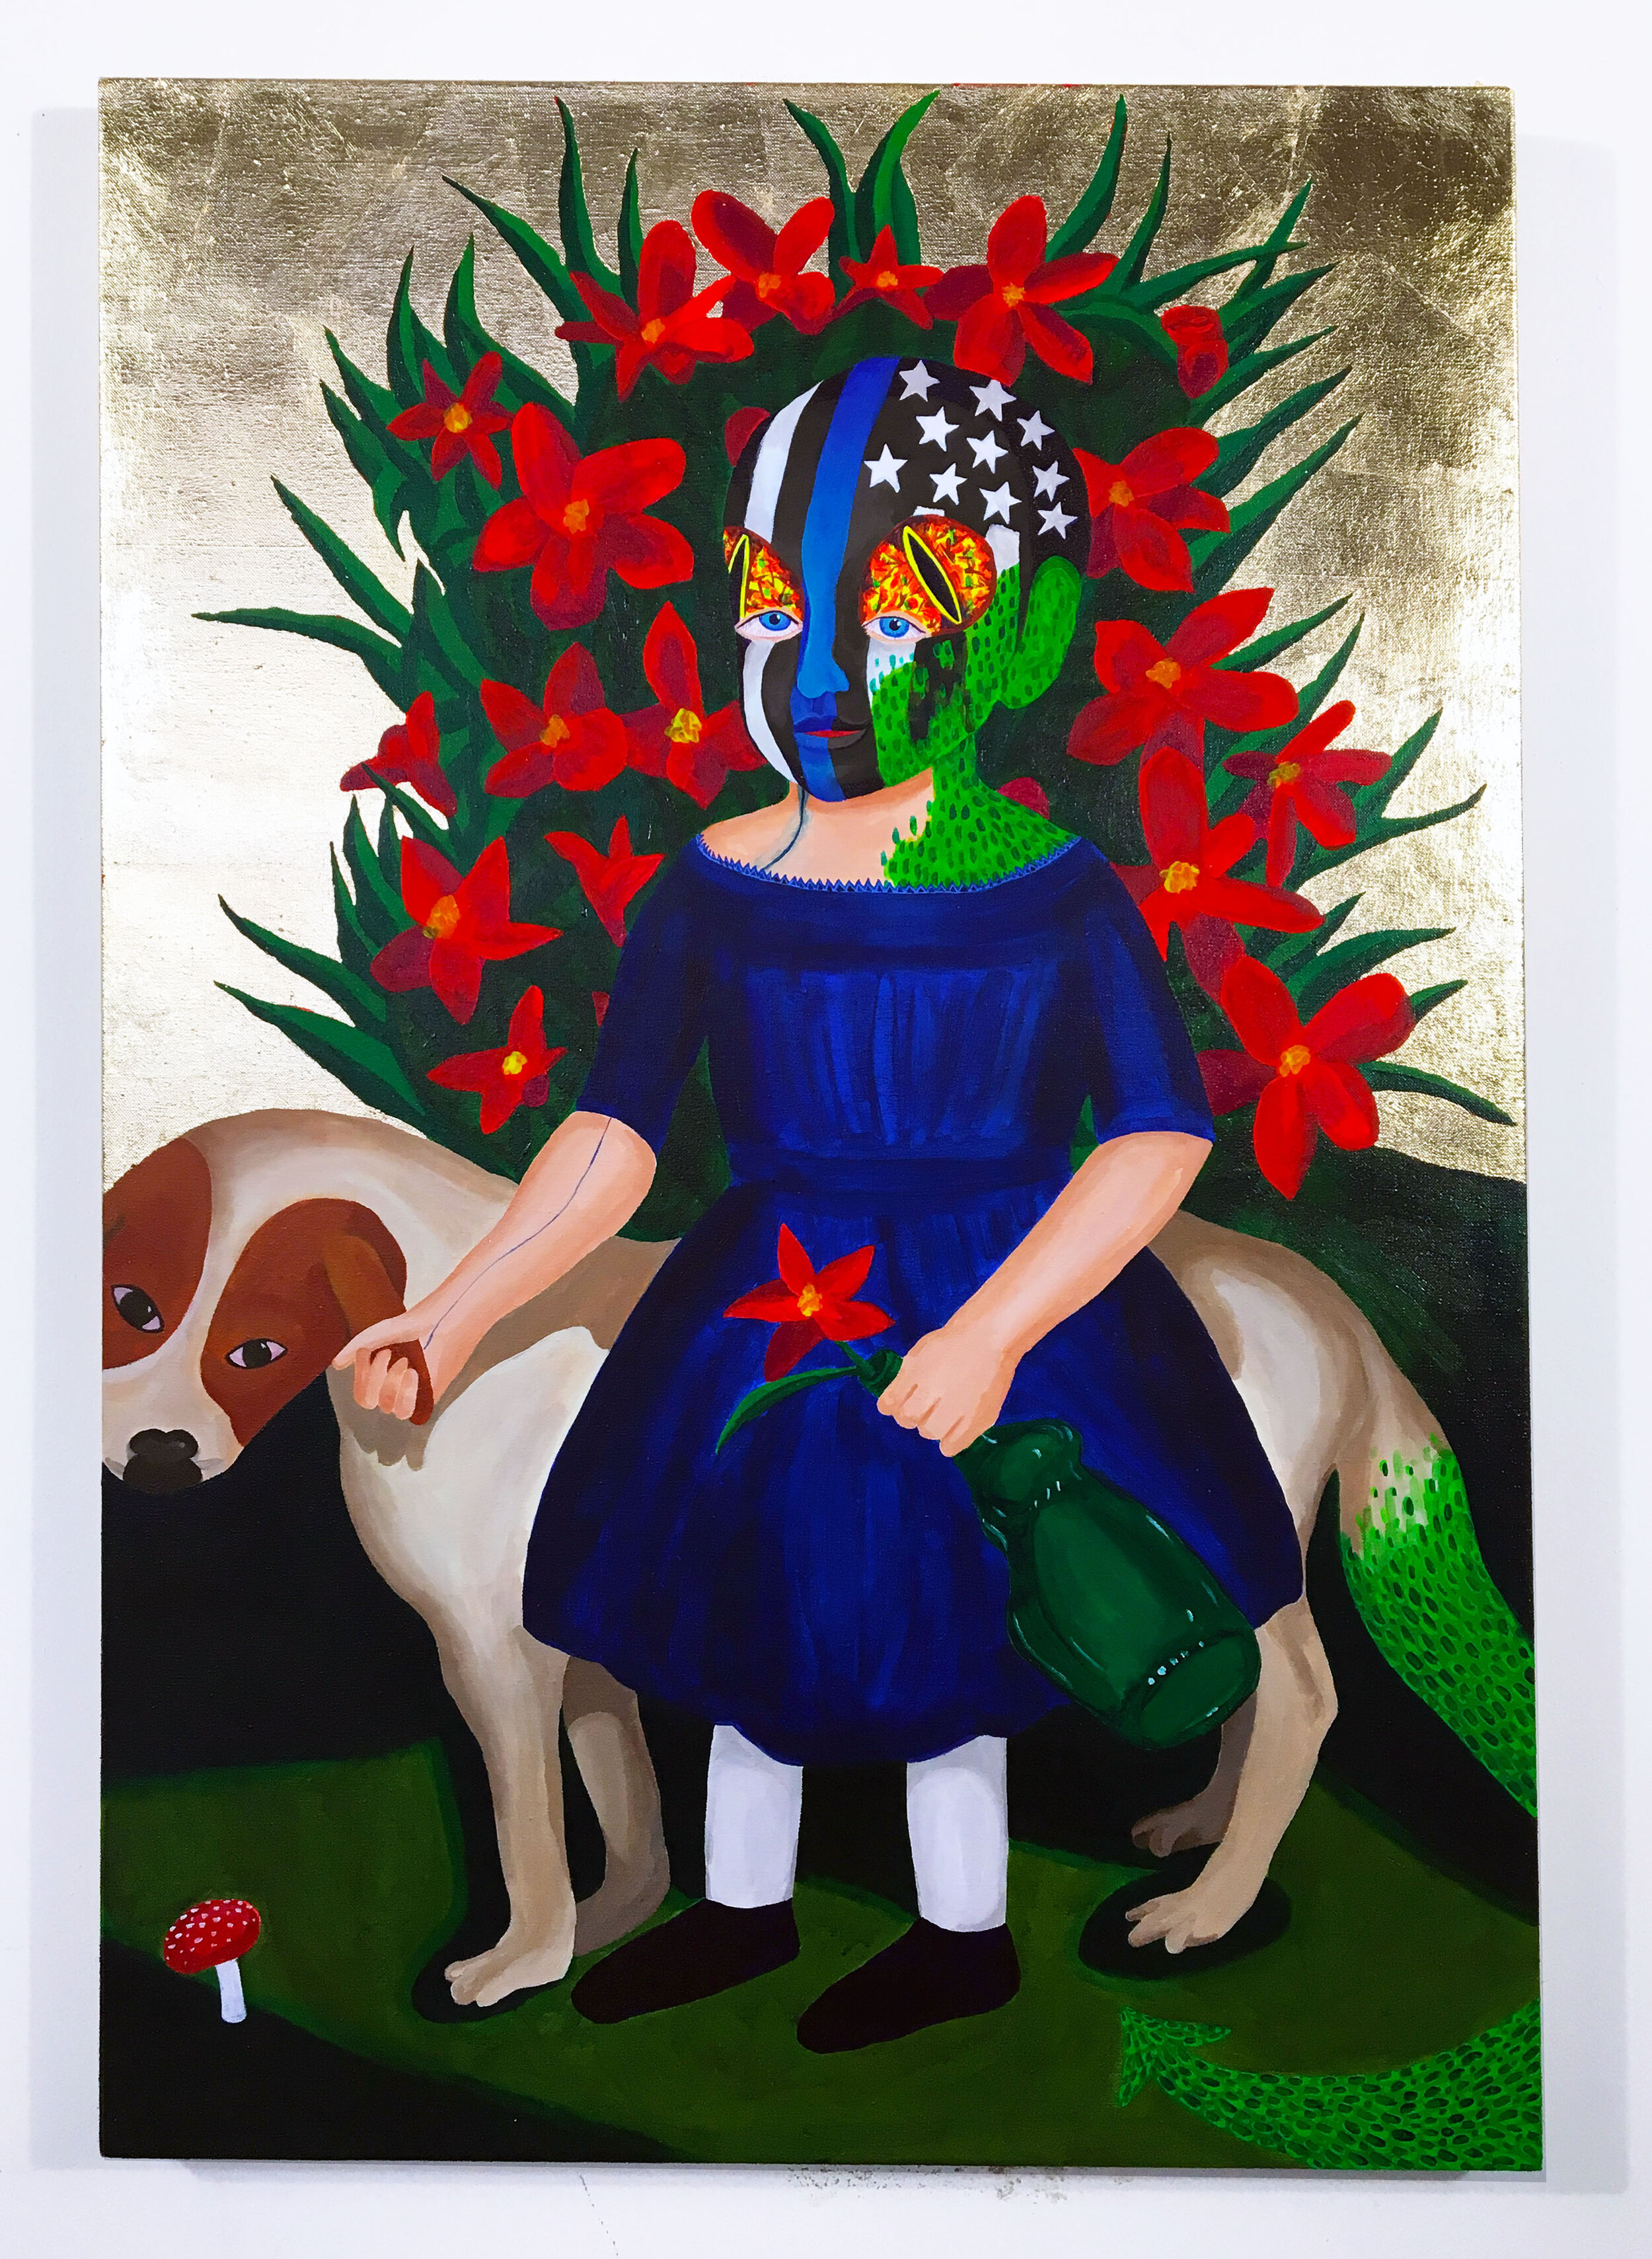  Little Boy and Dog (Hiroshima Glass and Oleanders), 2018  39 x 26 x 1.5 inches (99.06 x 66.04 x 3.81 cm.)  Acrylic and gold leaf on linen  Private collection, New York 